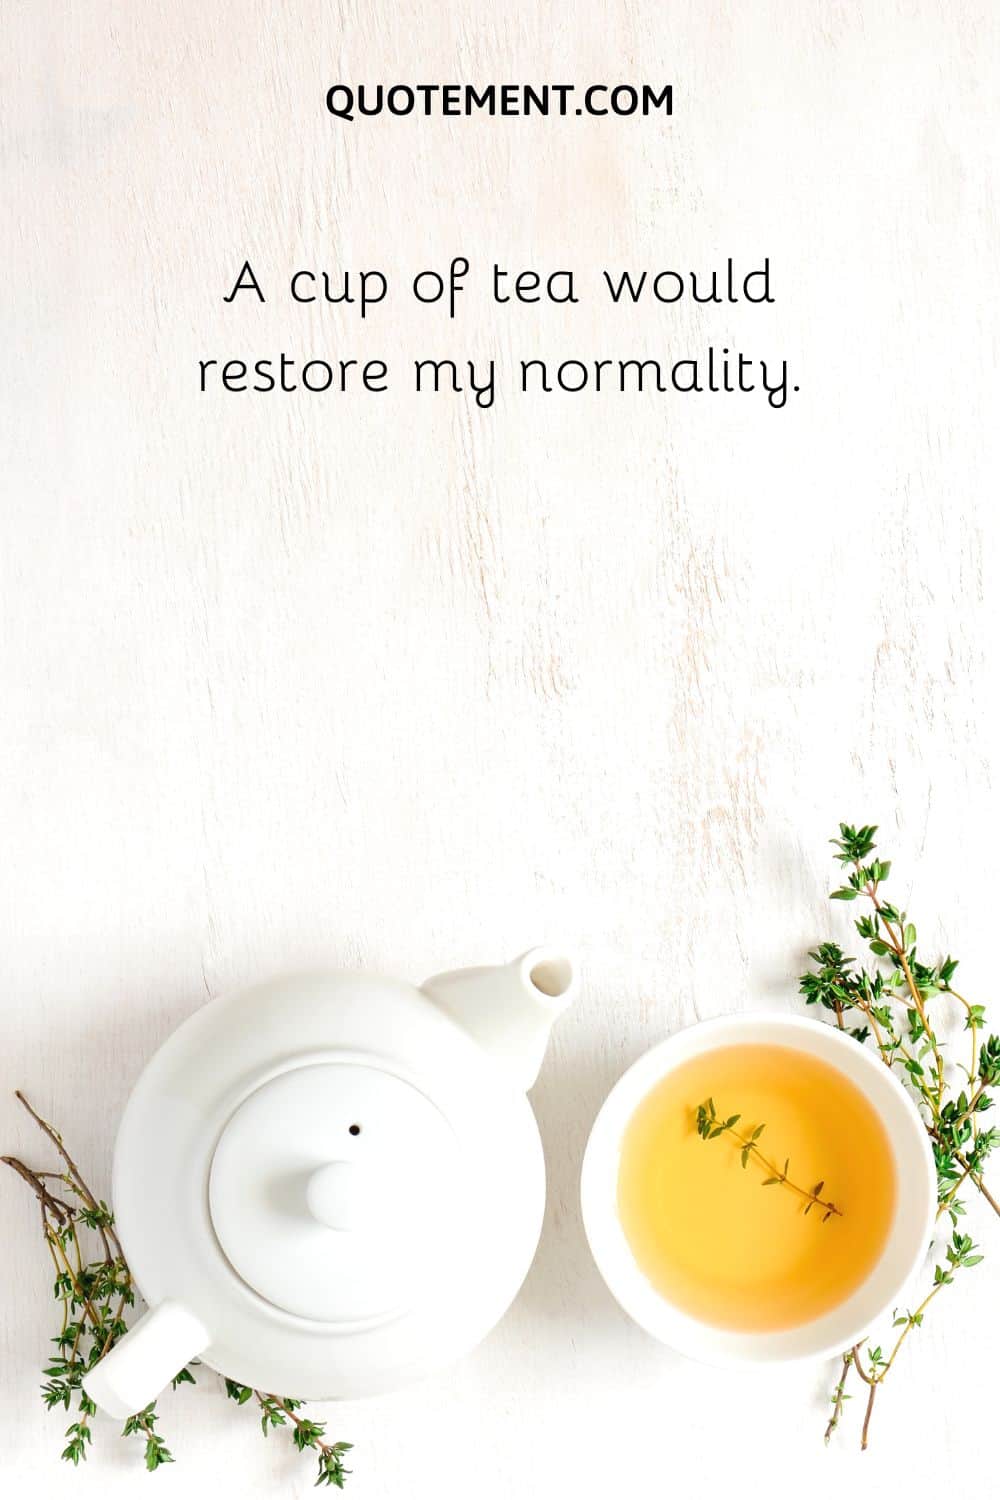 A cup of tea would restore my normality.